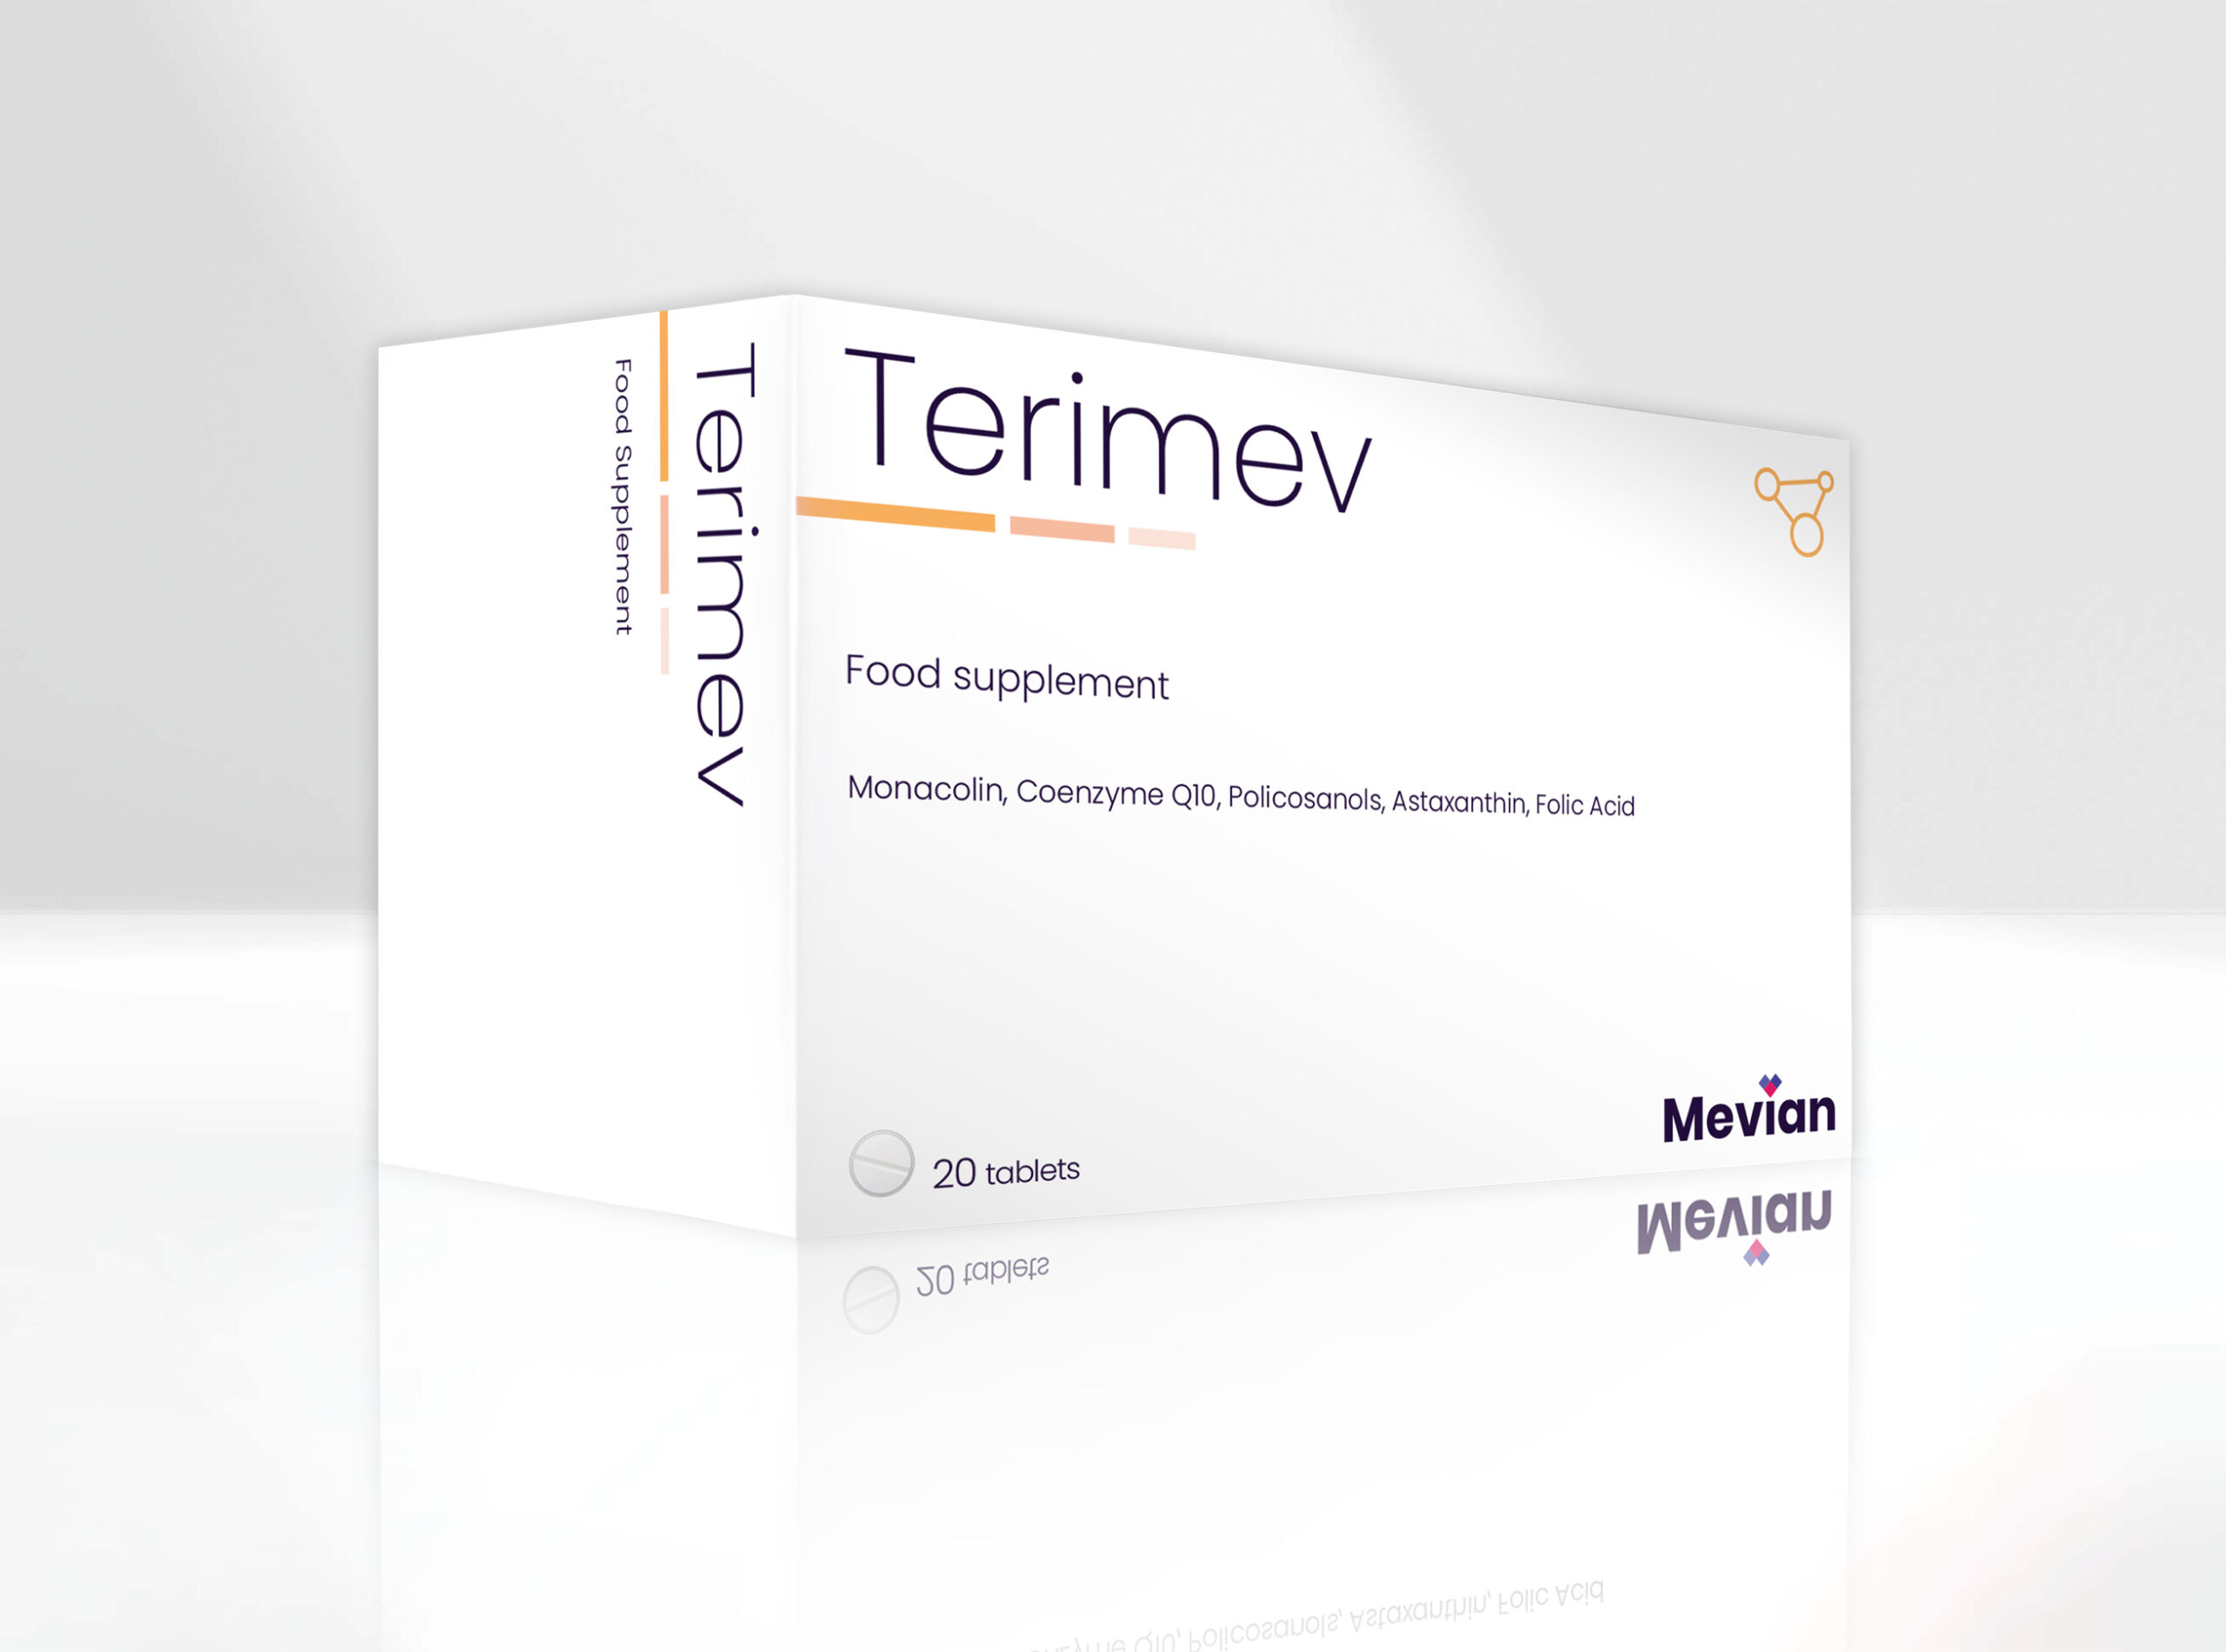 Terimev A natural solution that is ideal for Hypercholesterolemia by providing high monacolin levels in a single dose.